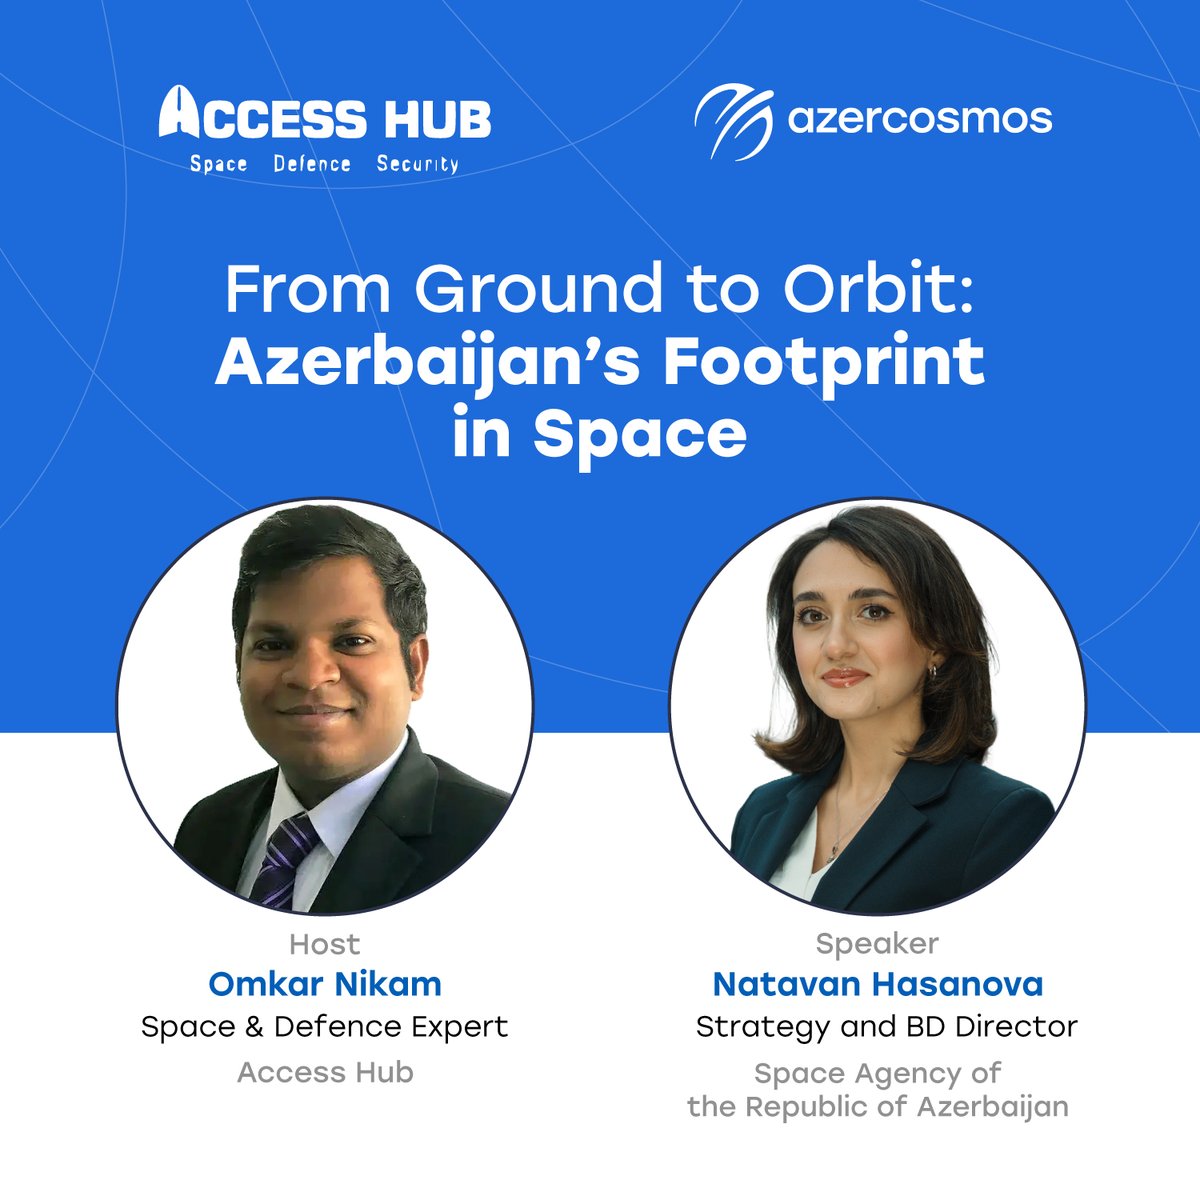 New podcast episode! Natavan Hasanova, our Strategy and BD Department Director, discussed our activities & industry development with Omkar Nikam, founder of 'Access Hub - Space, Defense, & Security' podcast. Watch via links: I: bit.ly/3IiU0hn II: bit.ly/4acRxkL